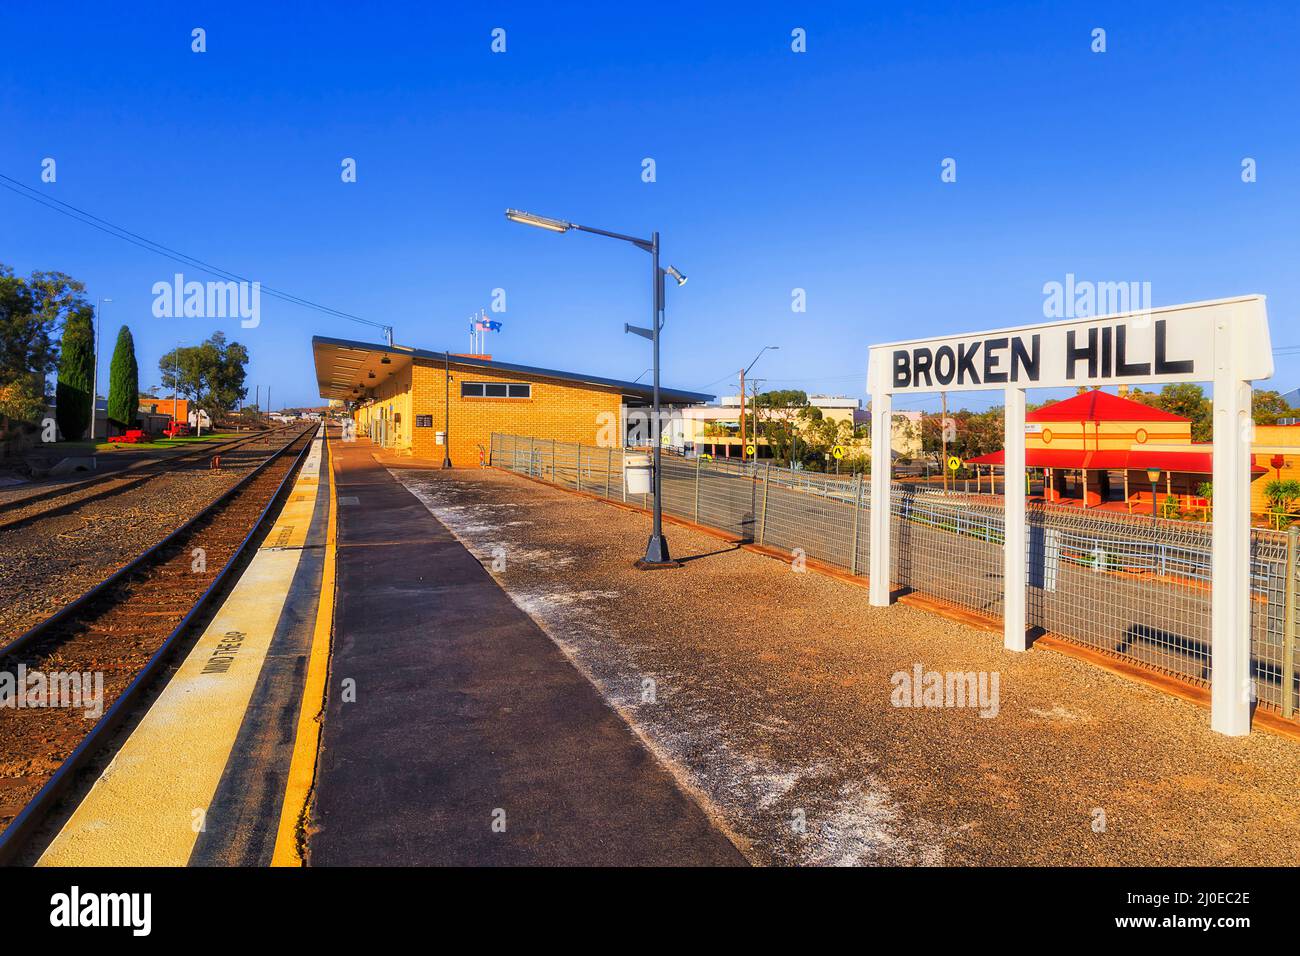 Broken hill sign post with city name at platform of Silver city train station. Stock Photo